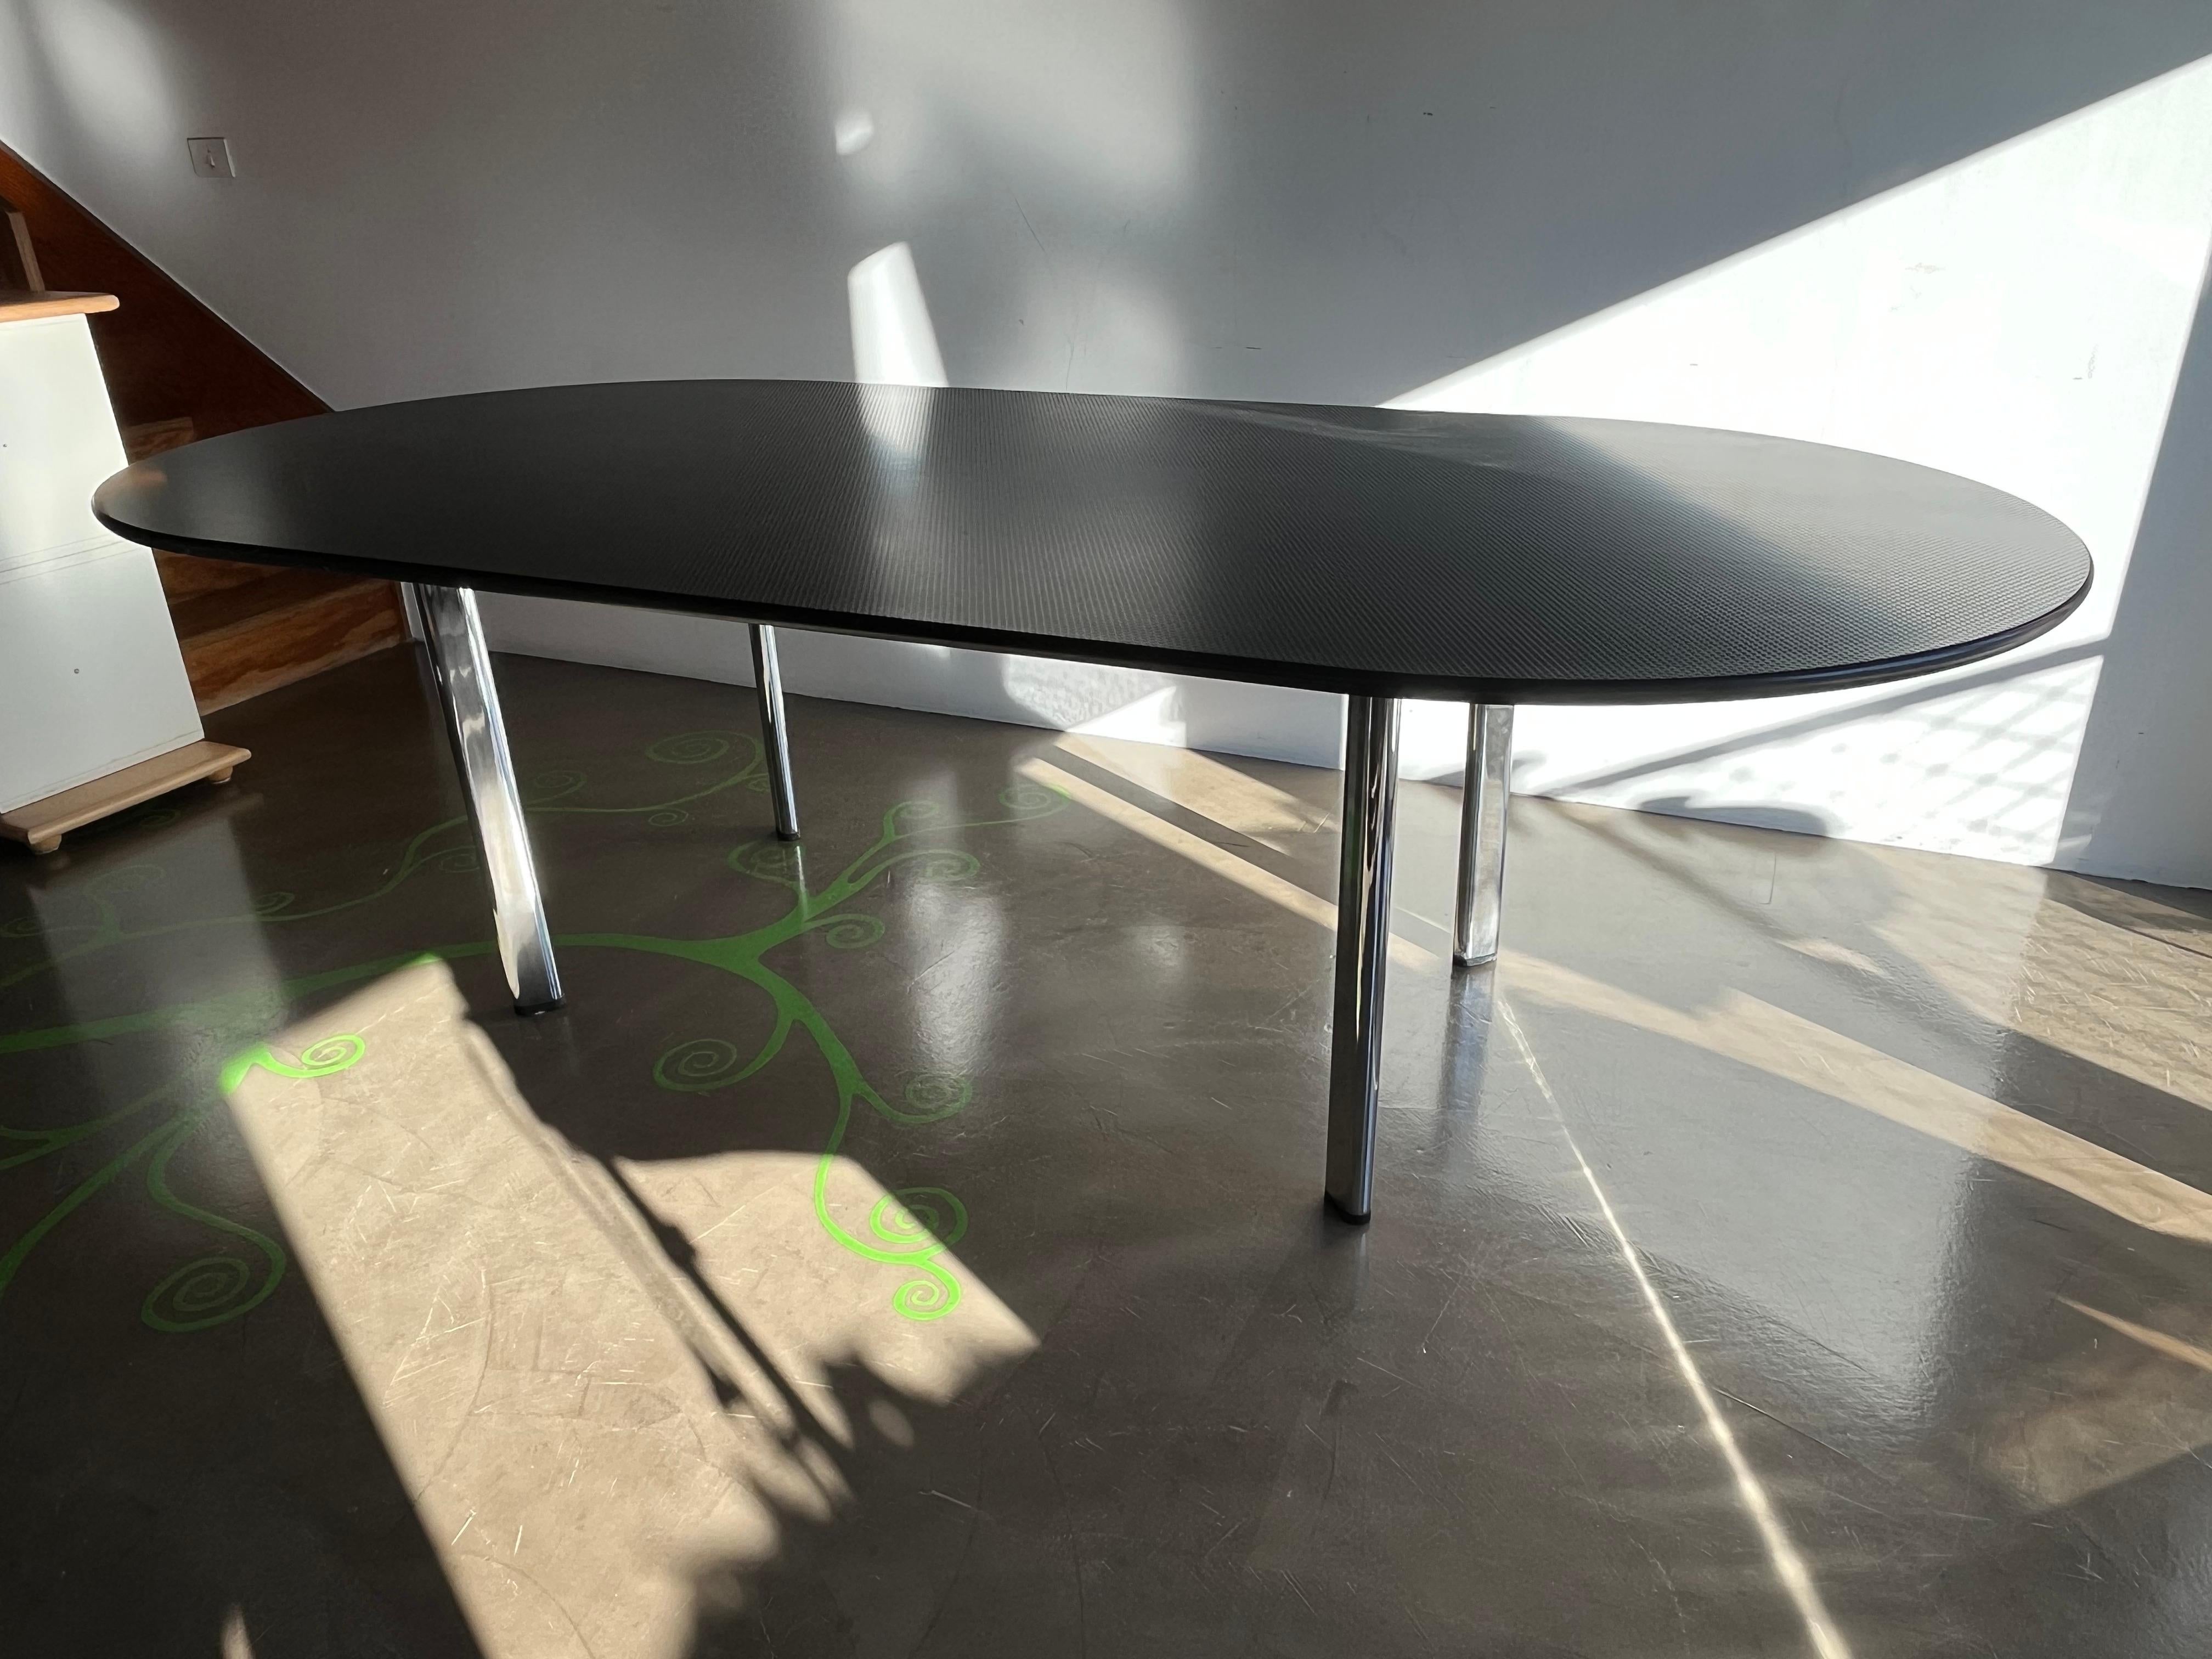 Interesting and impressive oval table ideal as a dining table or meeting room table. 
The table has a rectangular steel frame, wooden top covered with rubber material with stamp pattern. It recalls the same material used in the 1960s for the Milan